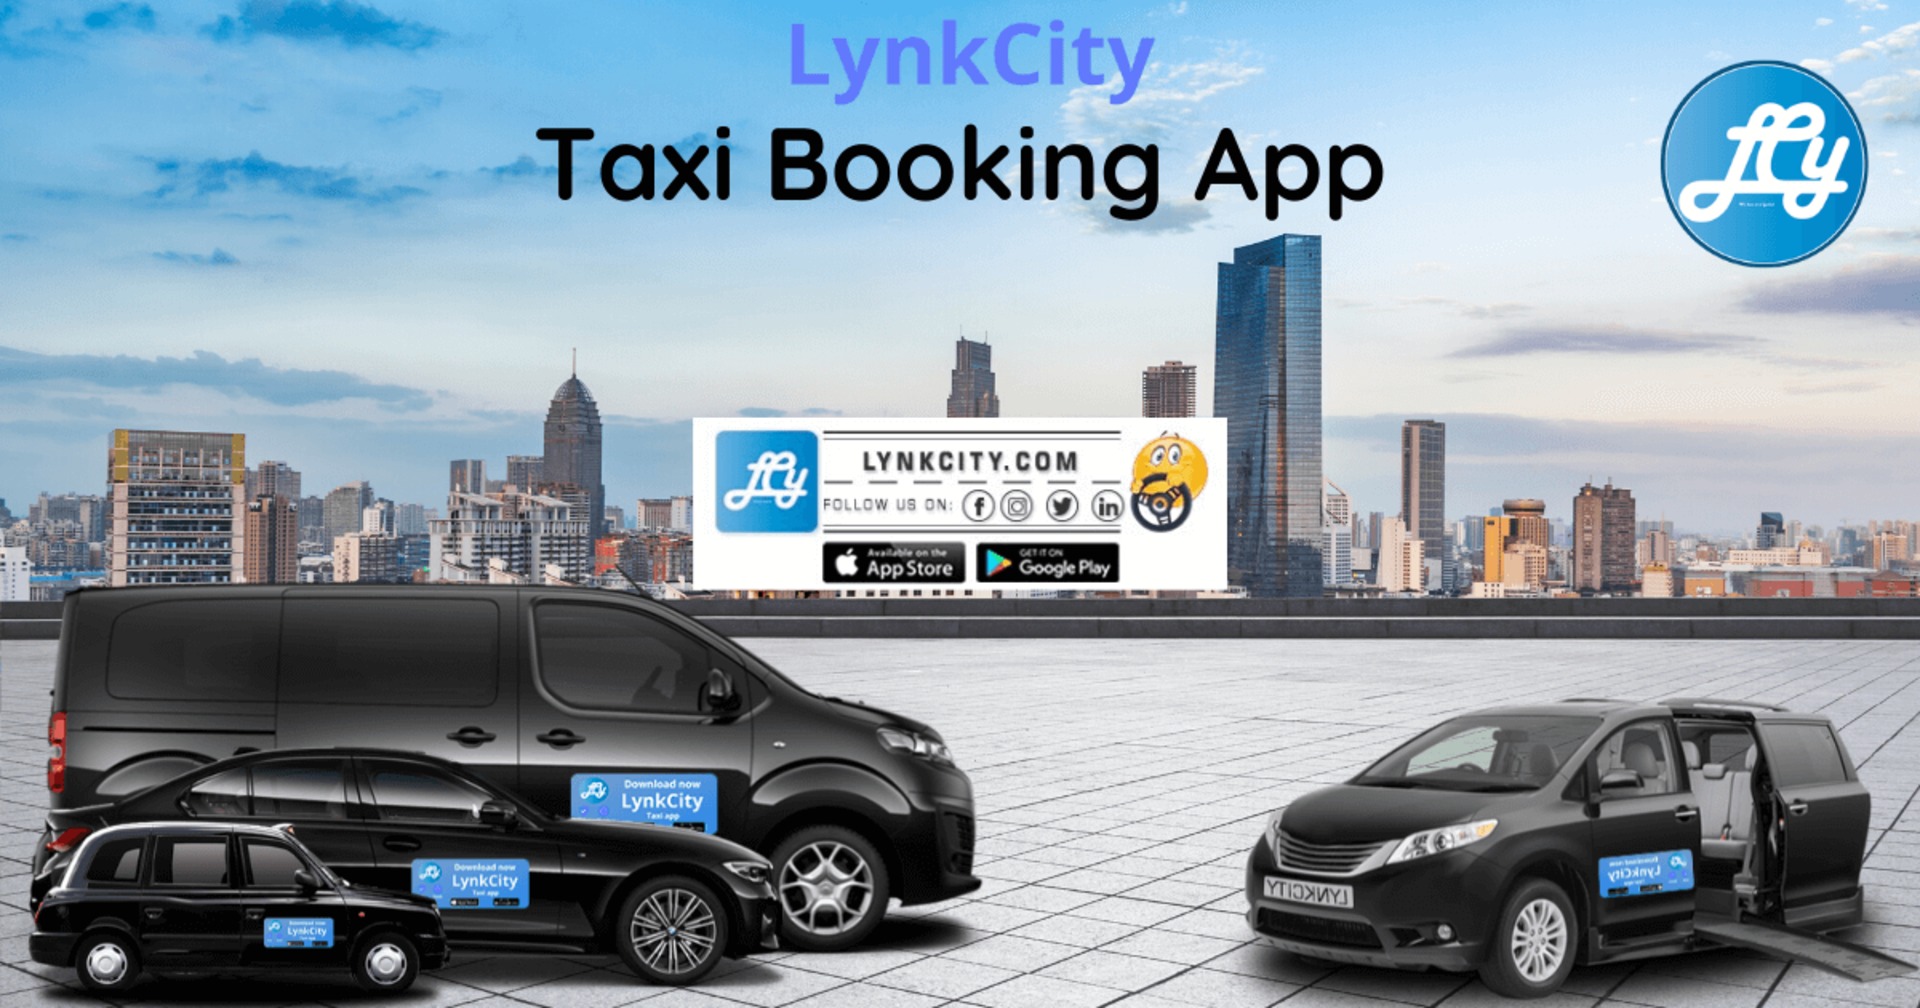 LynkCity - Taxi Booking App image